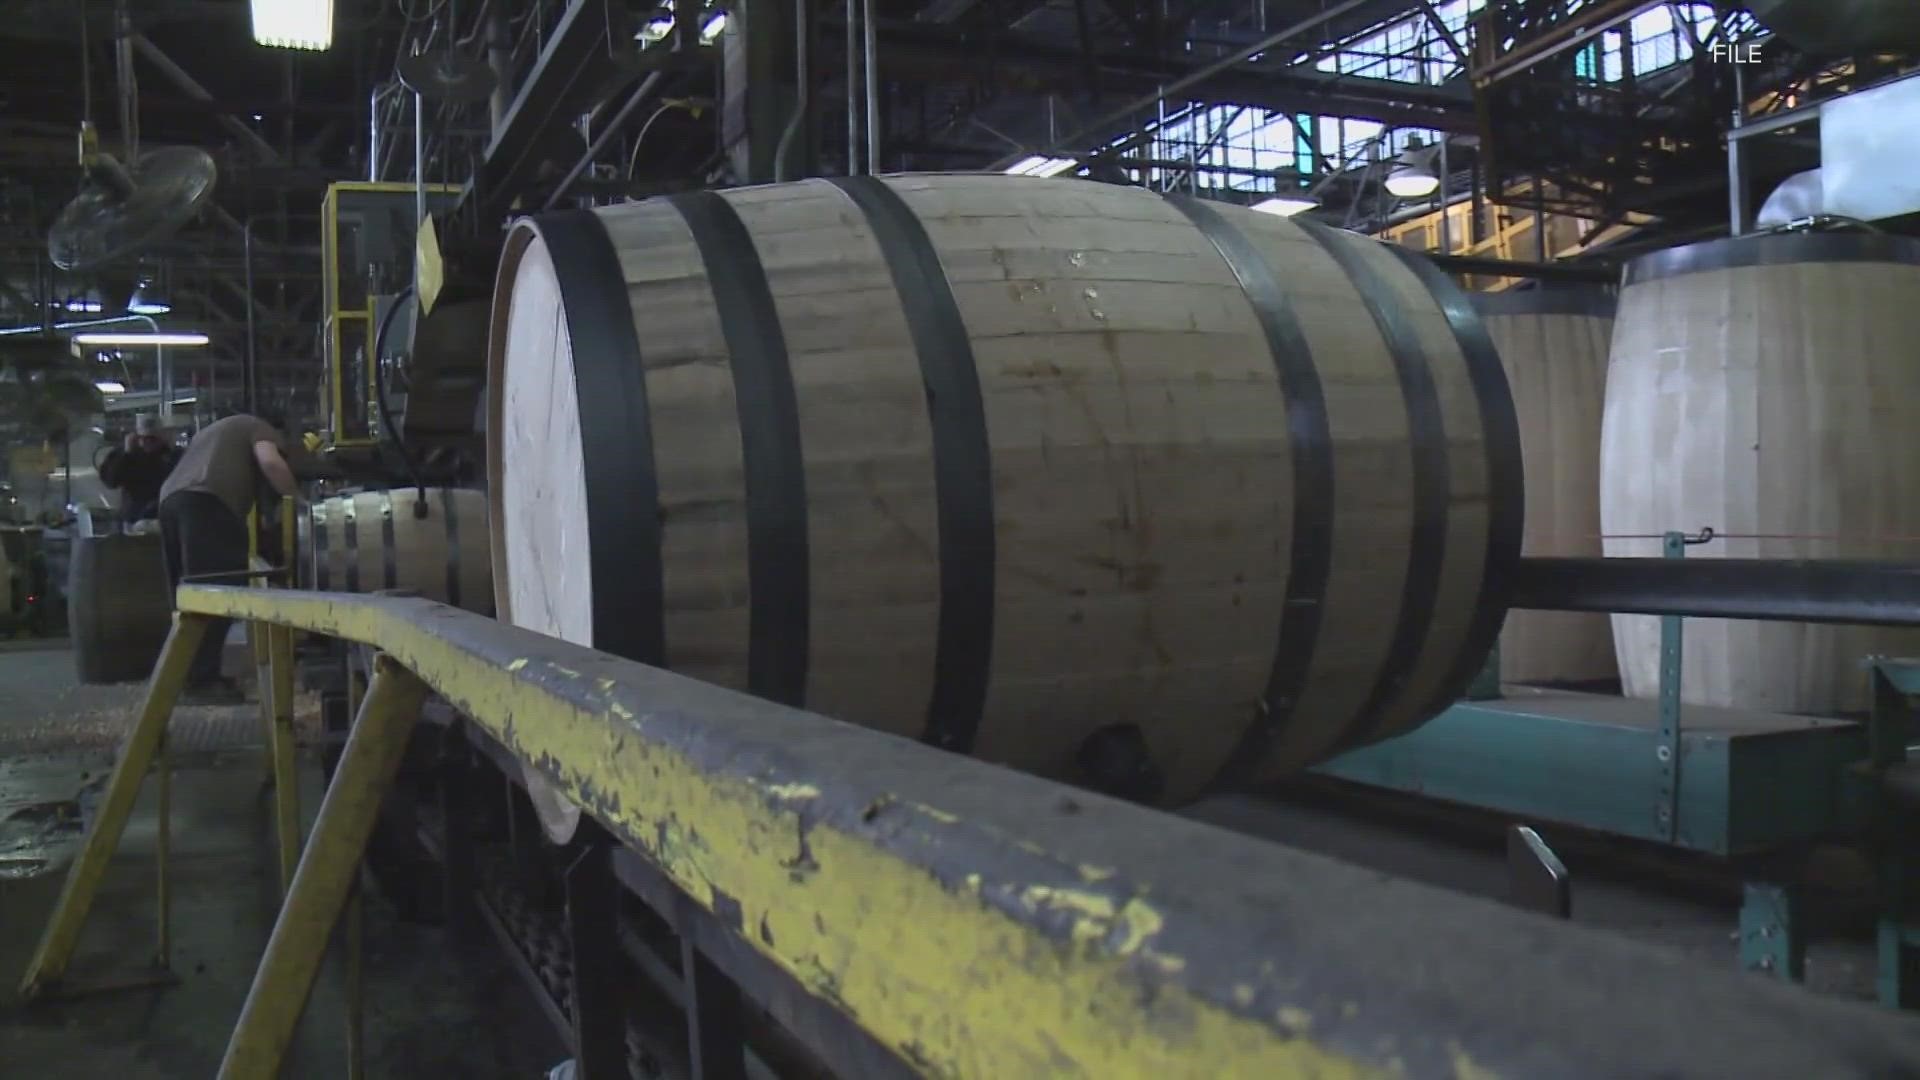 Distillers pay taxes on the aging barrels they have on their property each year. A tax some lawmakers are looking to remove, but it could come at a cost.